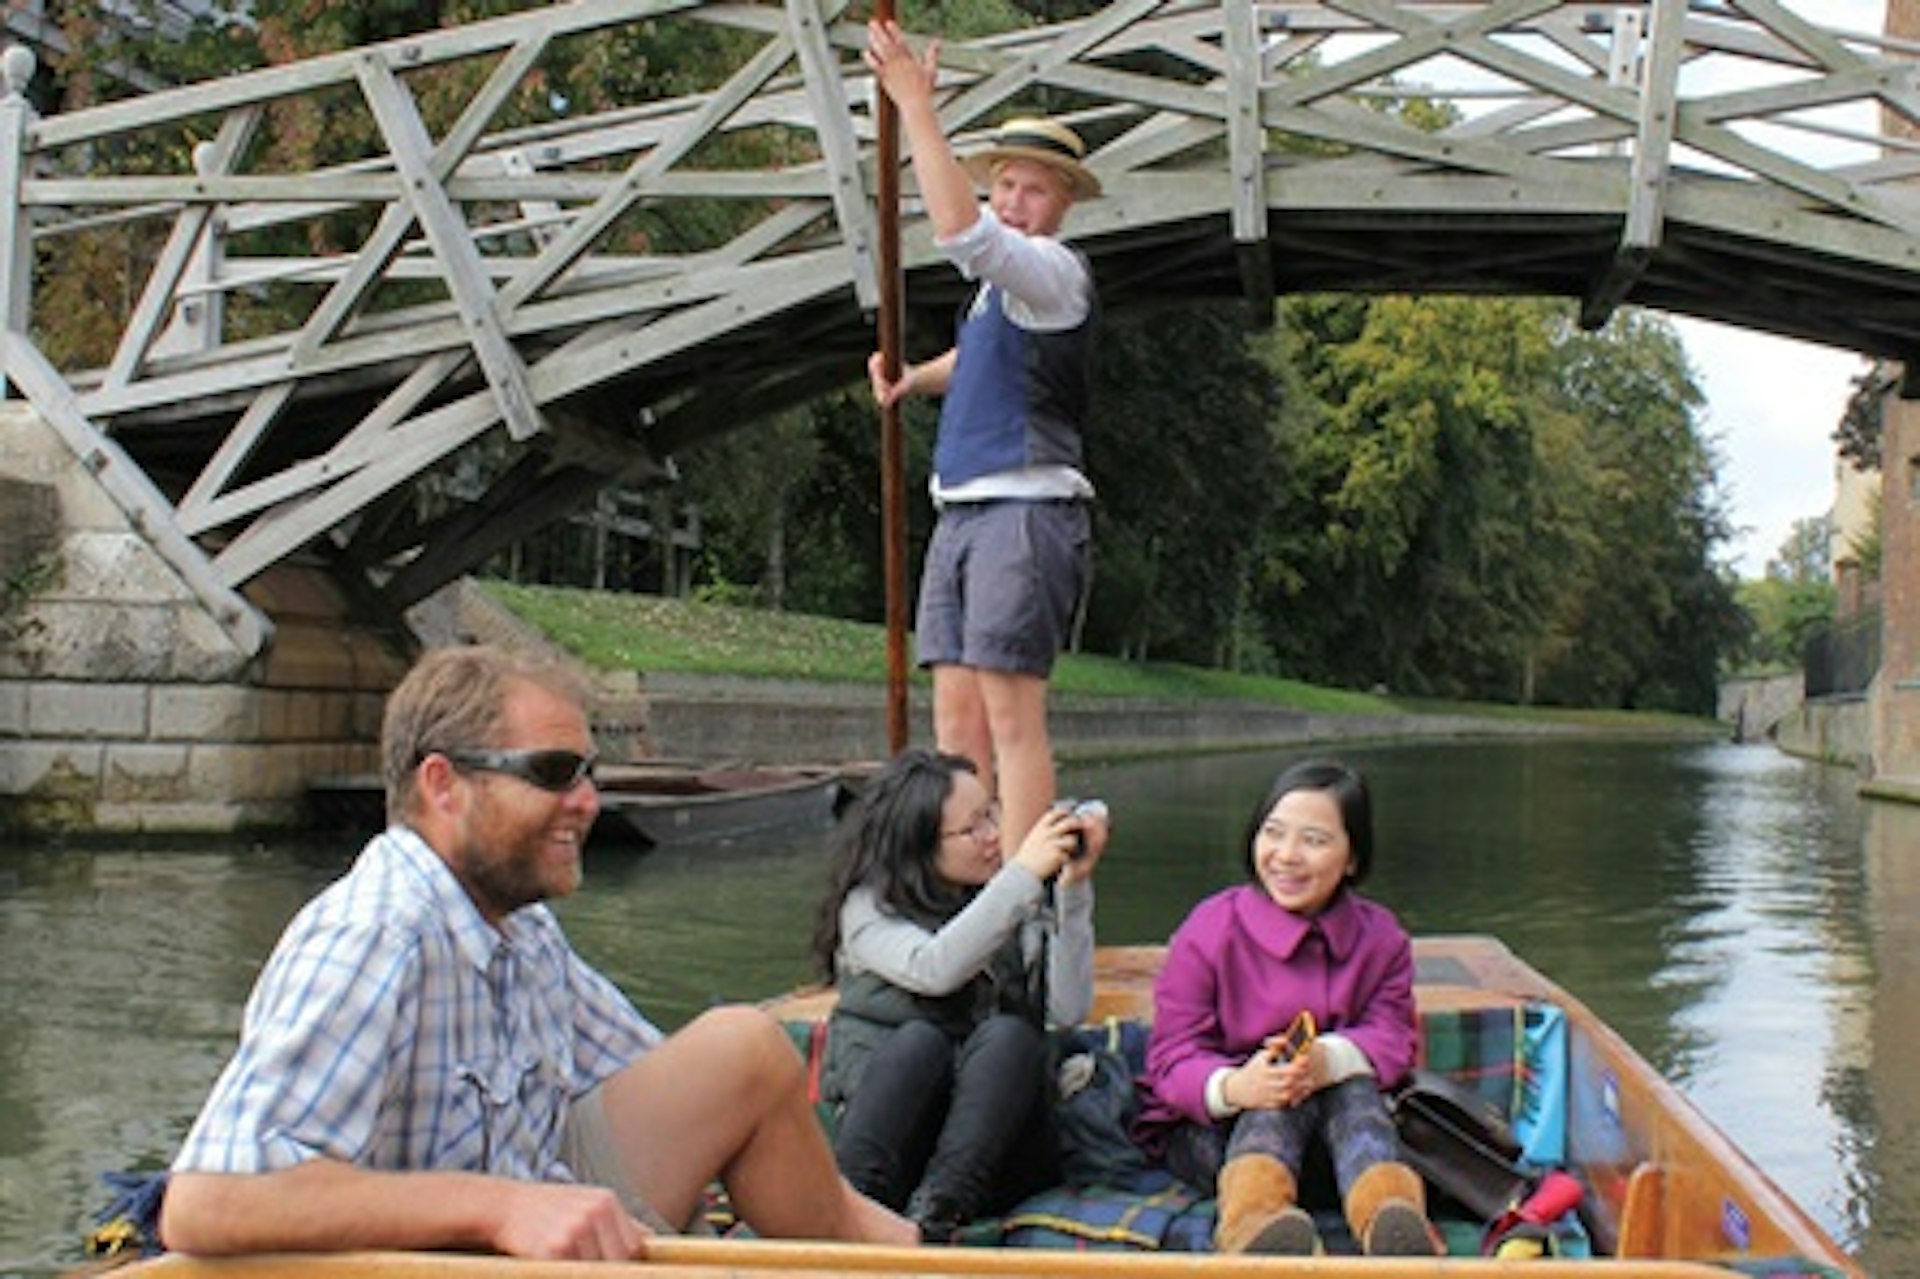 Chauffeured Cambridge Punting Tour for up to Three 1